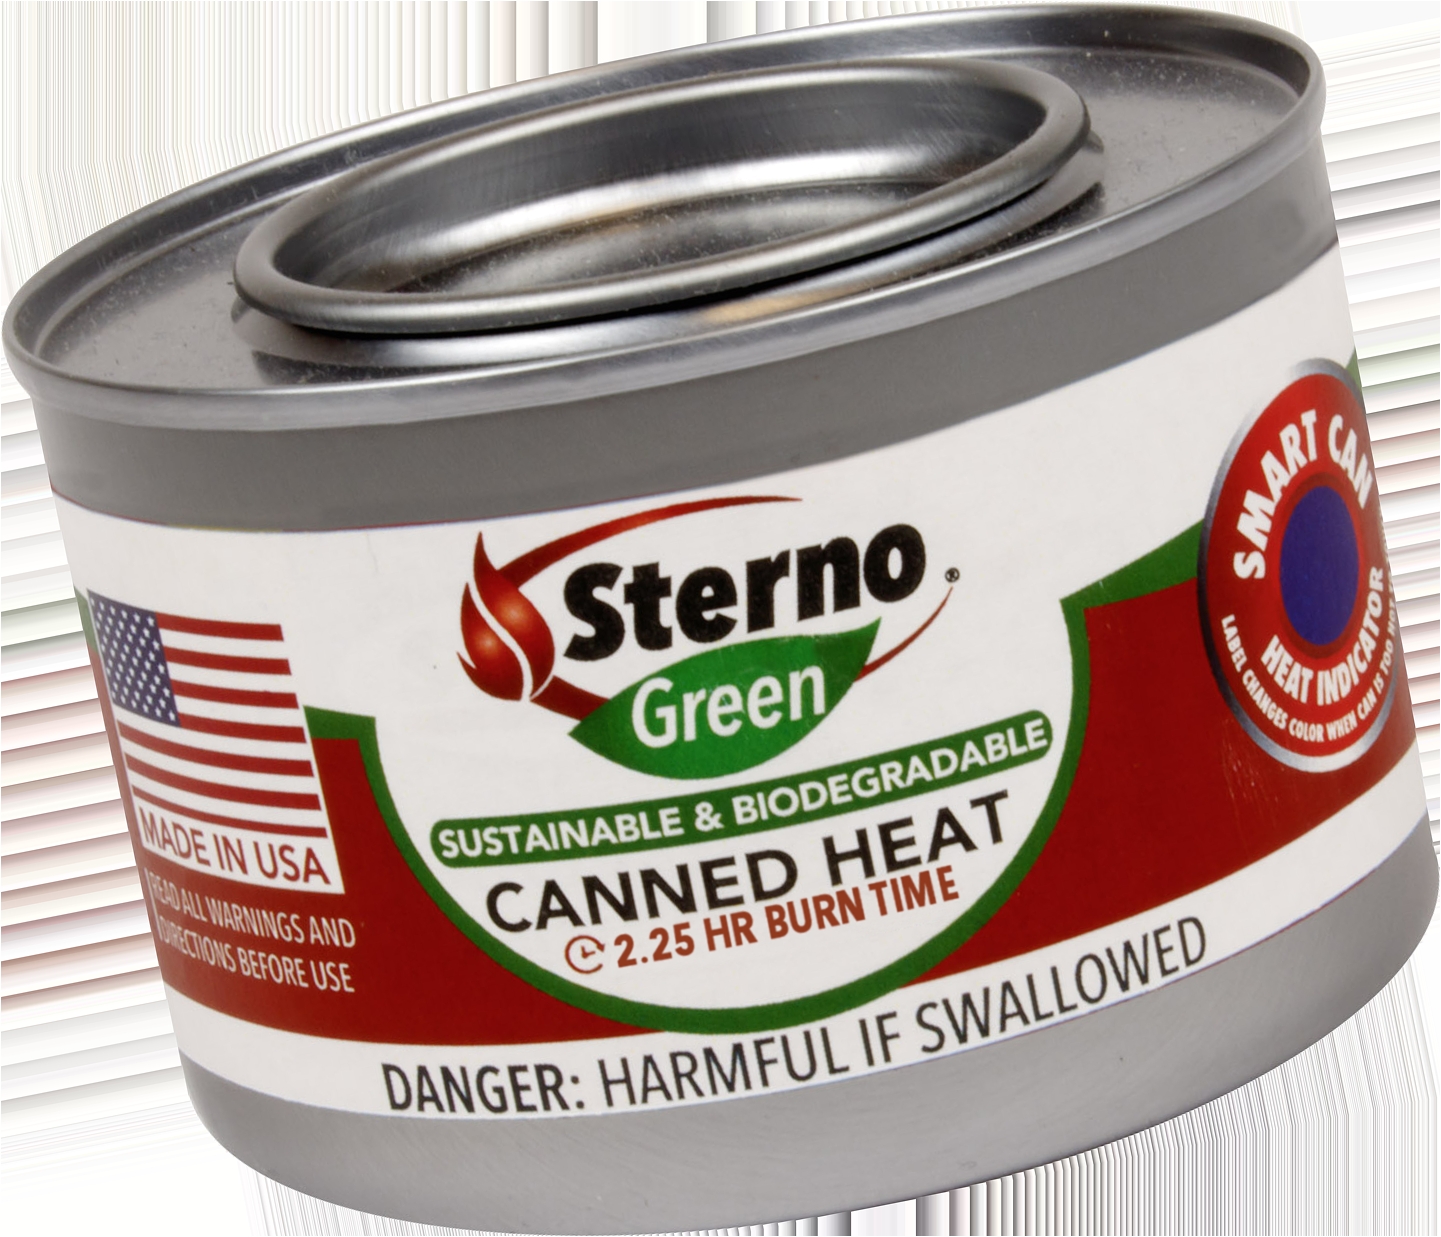 in 1914 the maker of fine chafing dishes introduced sterno canned heat improving the quality of entertaining forever